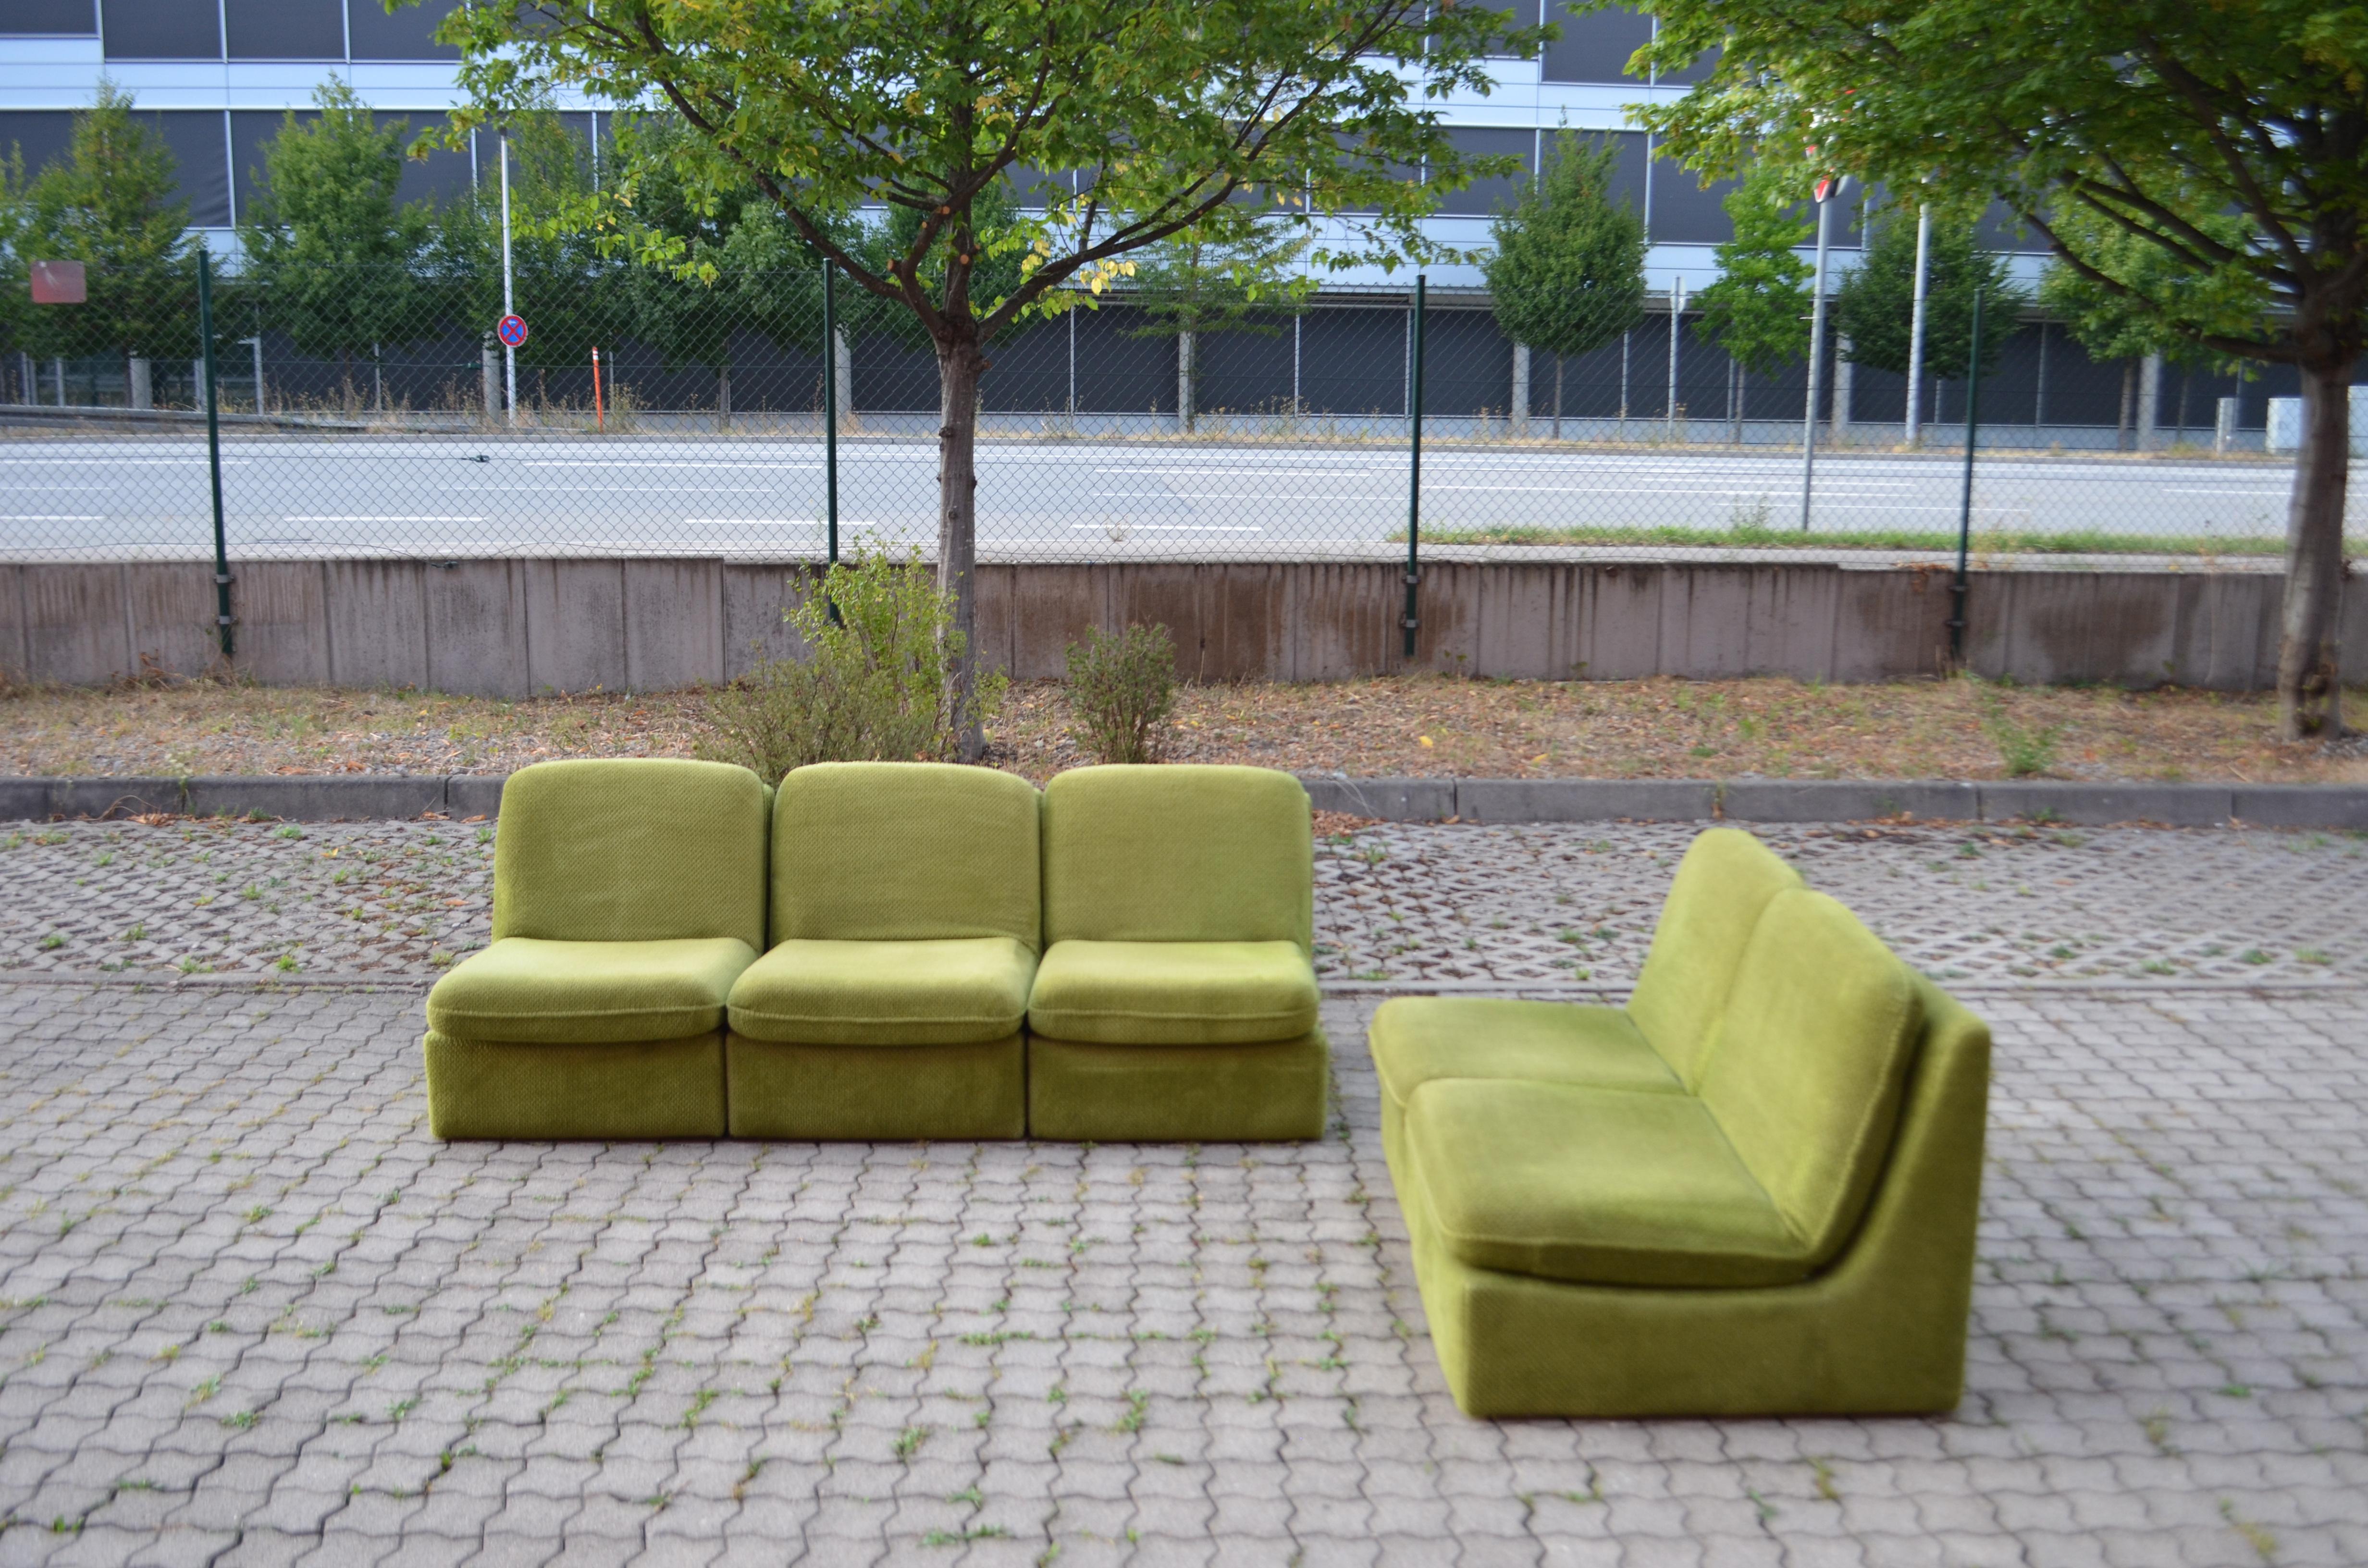 This Modular sectional sofa was manufactured in Germany.
It is a pure 70ties design with timeless modern shape.
The fabric is a limegreen velour and has a beautiful soft touch.
The frame of every element is made of wood and upholstery in the